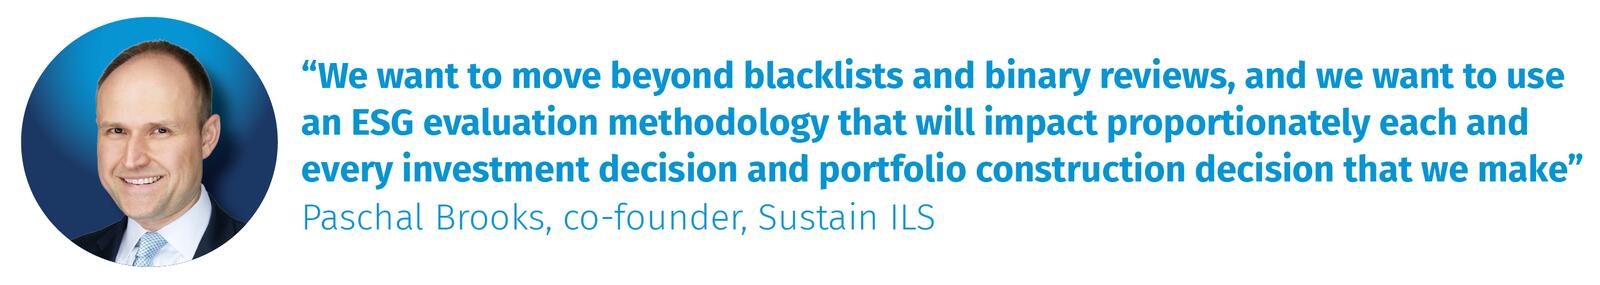 Paschal Brooks, co-founder, Sustain ILS